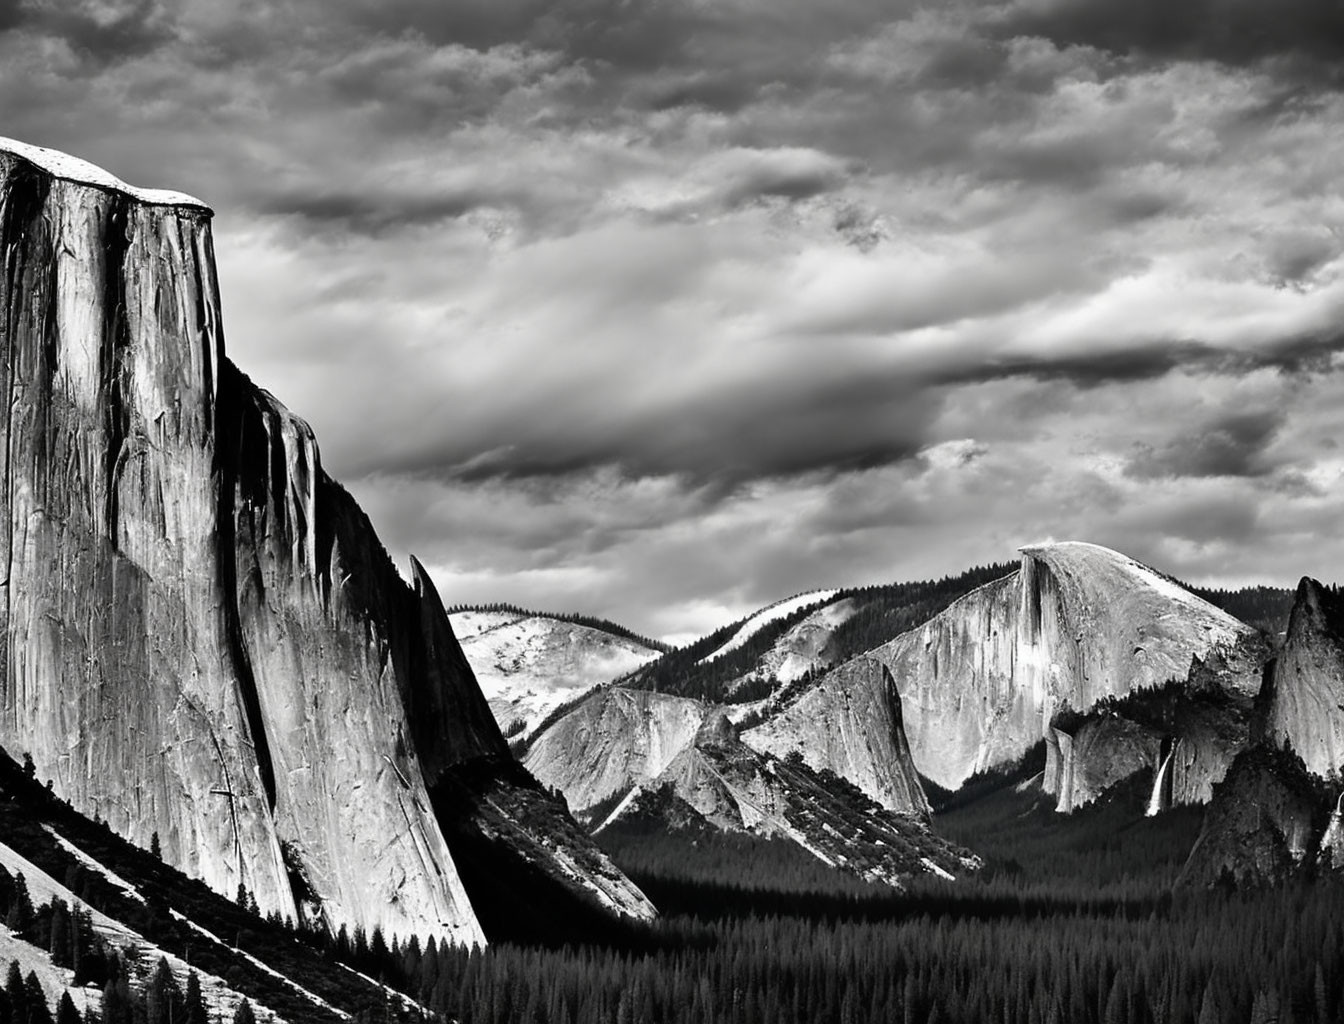 Monochrome landscape: Majestic mountain, dramatic sky, forested valley